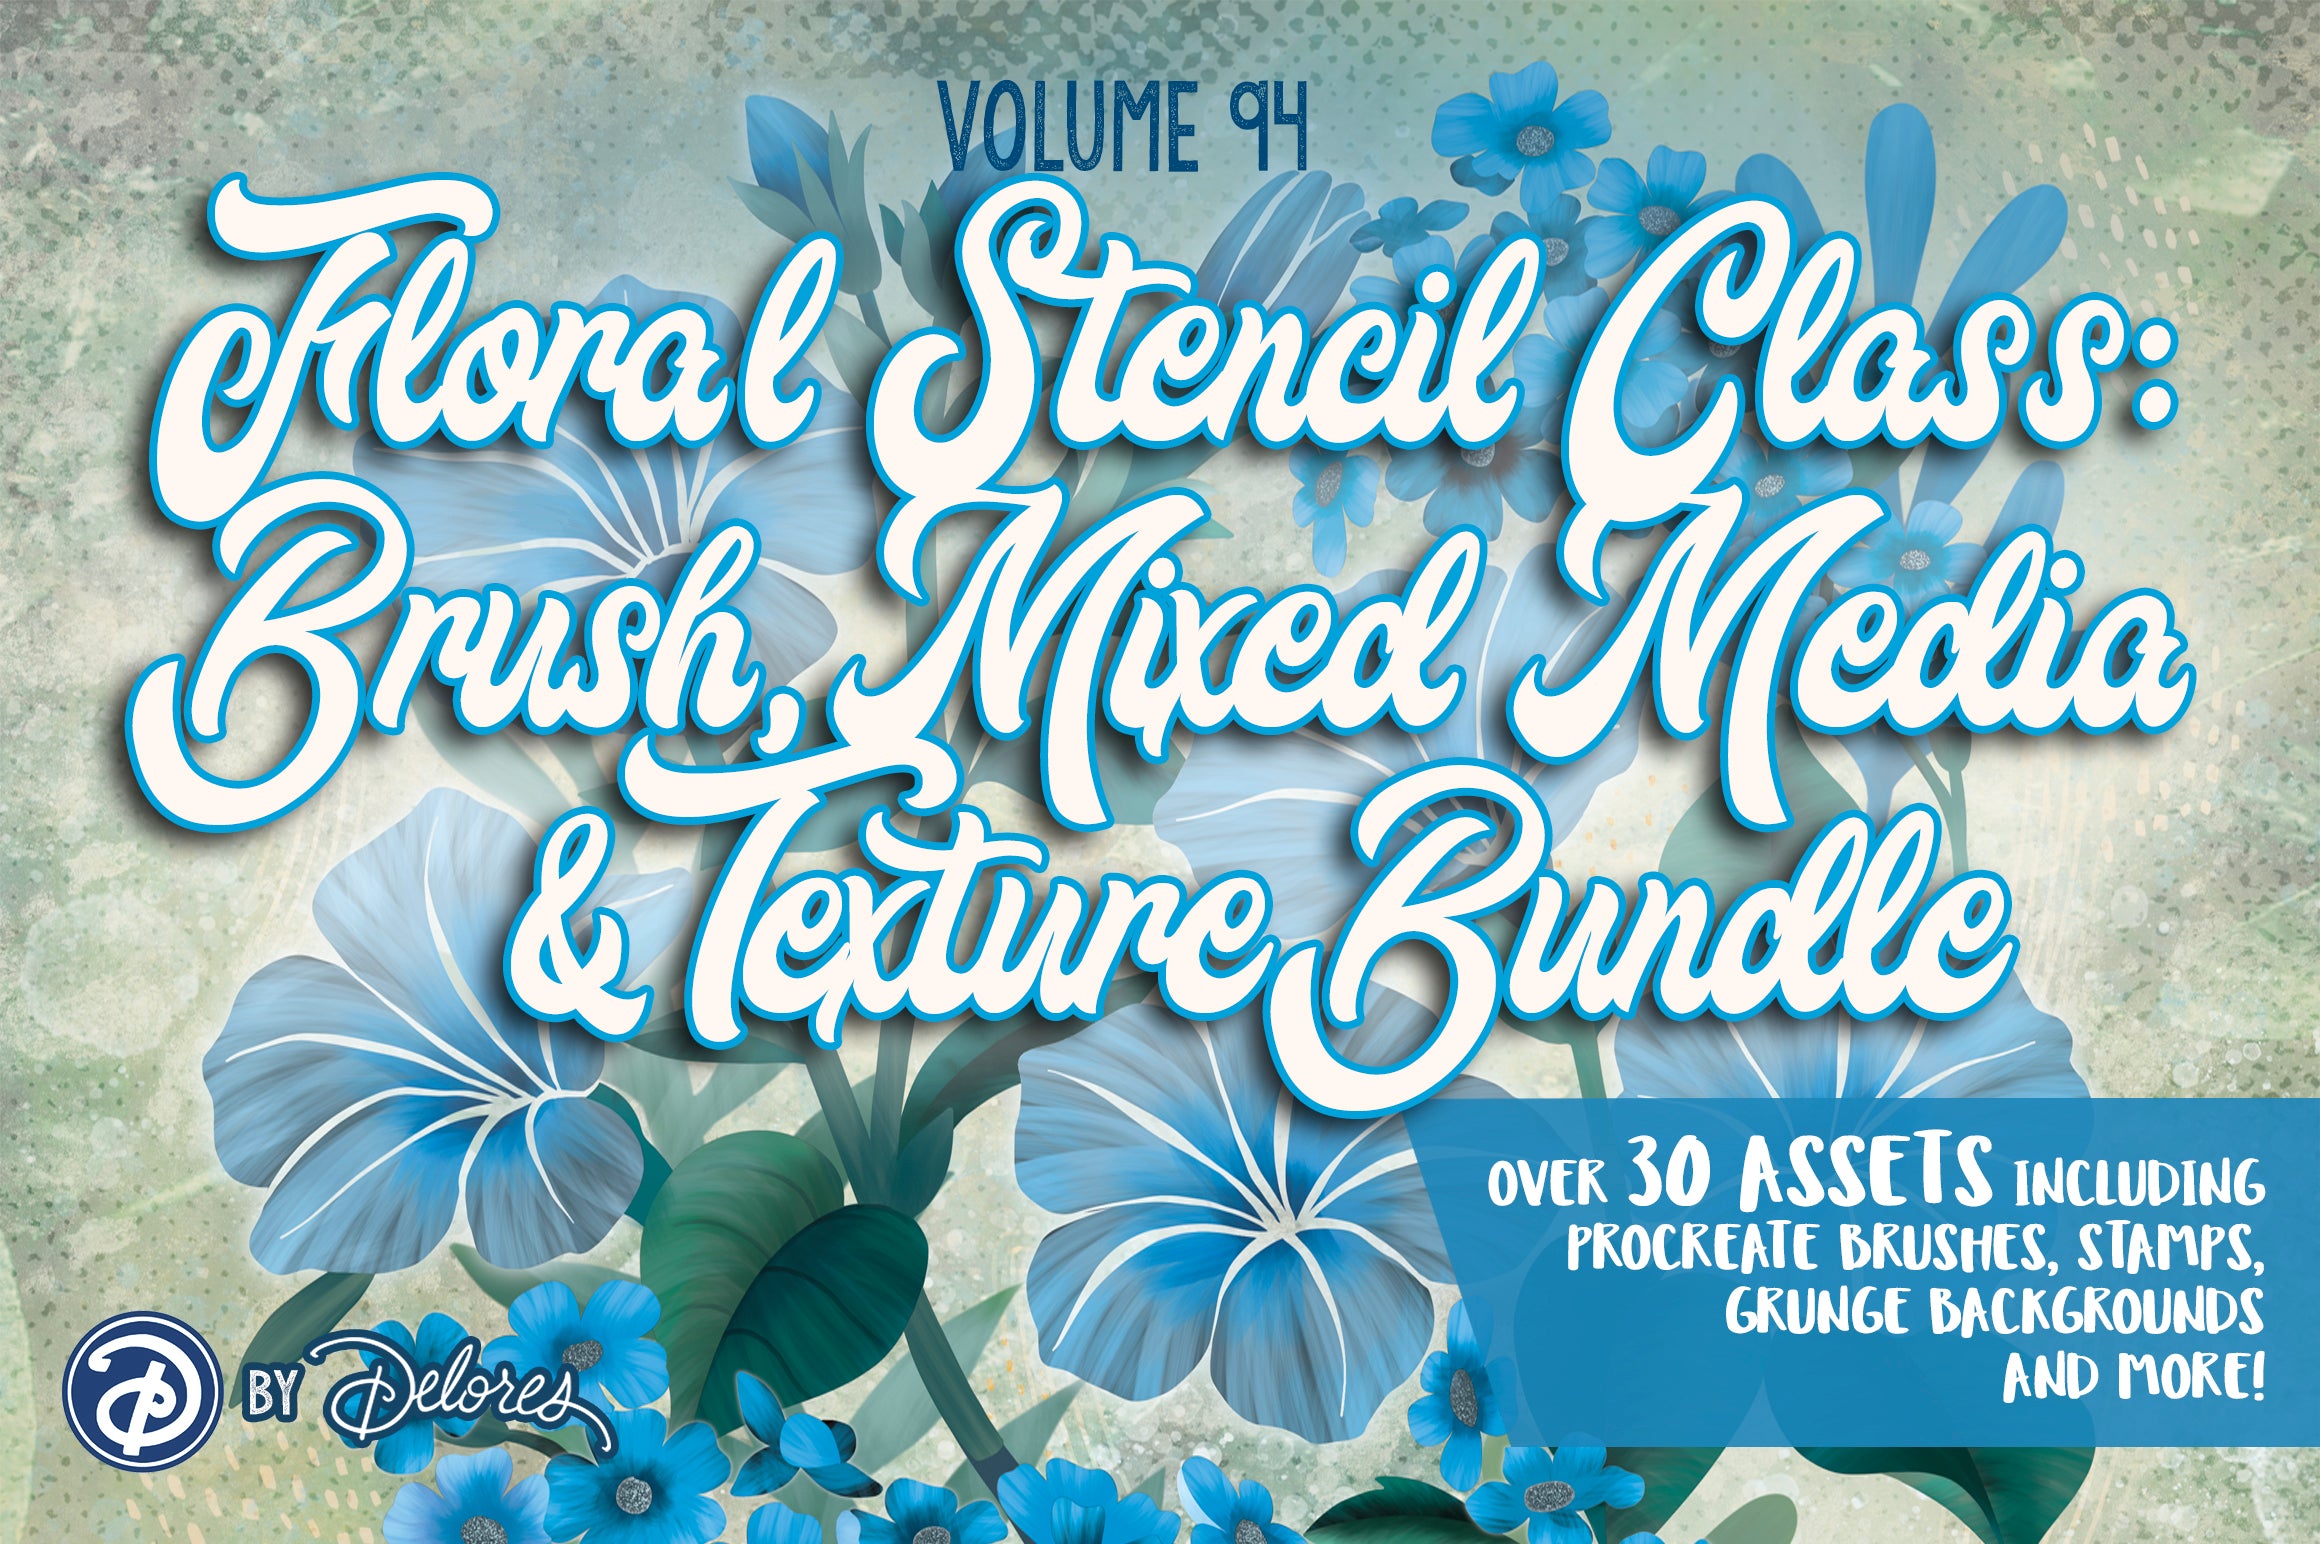 Volume 094 - Free Grunge and Mixed Media for Floral Stencil Class